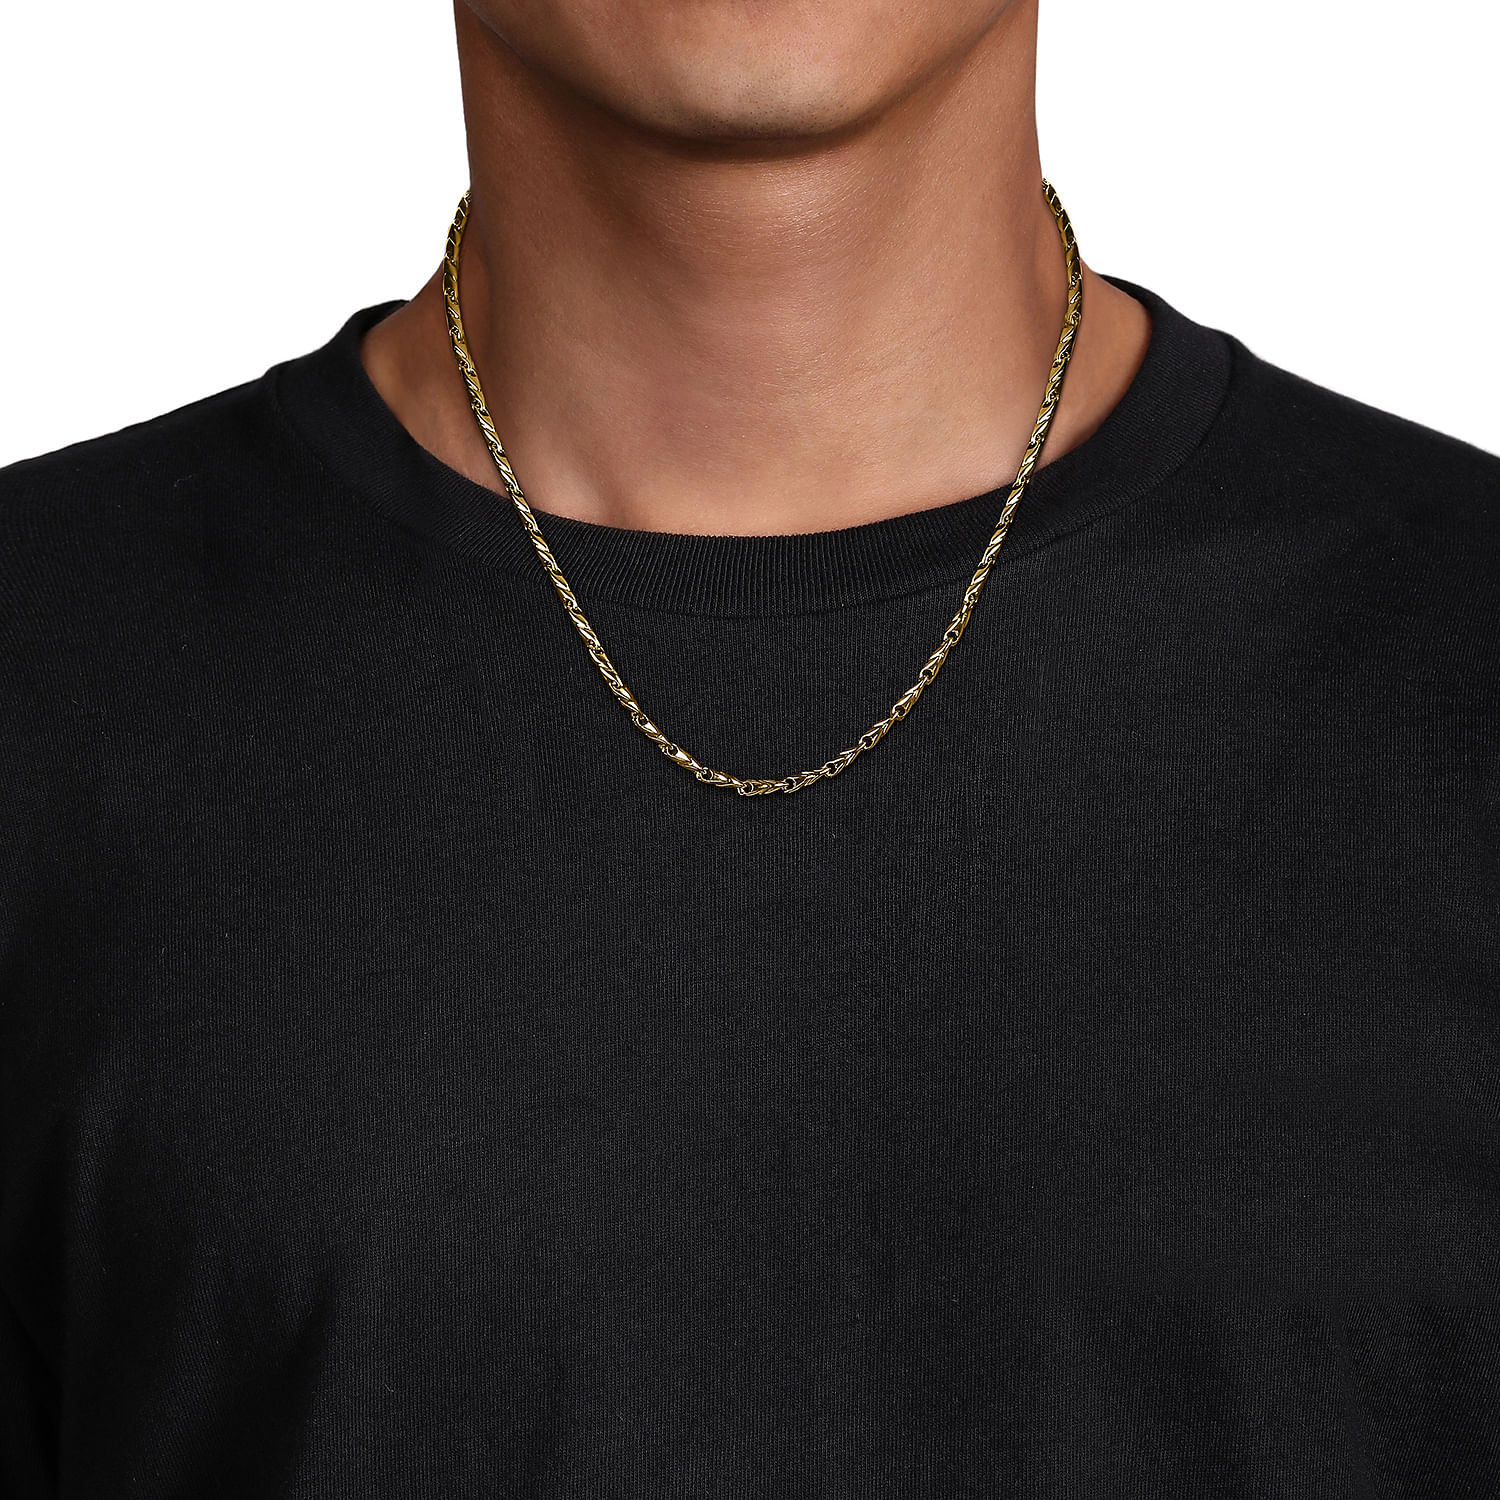 20 Inch 14K Yellow Gold Men's Chain Necklace - Shot 4